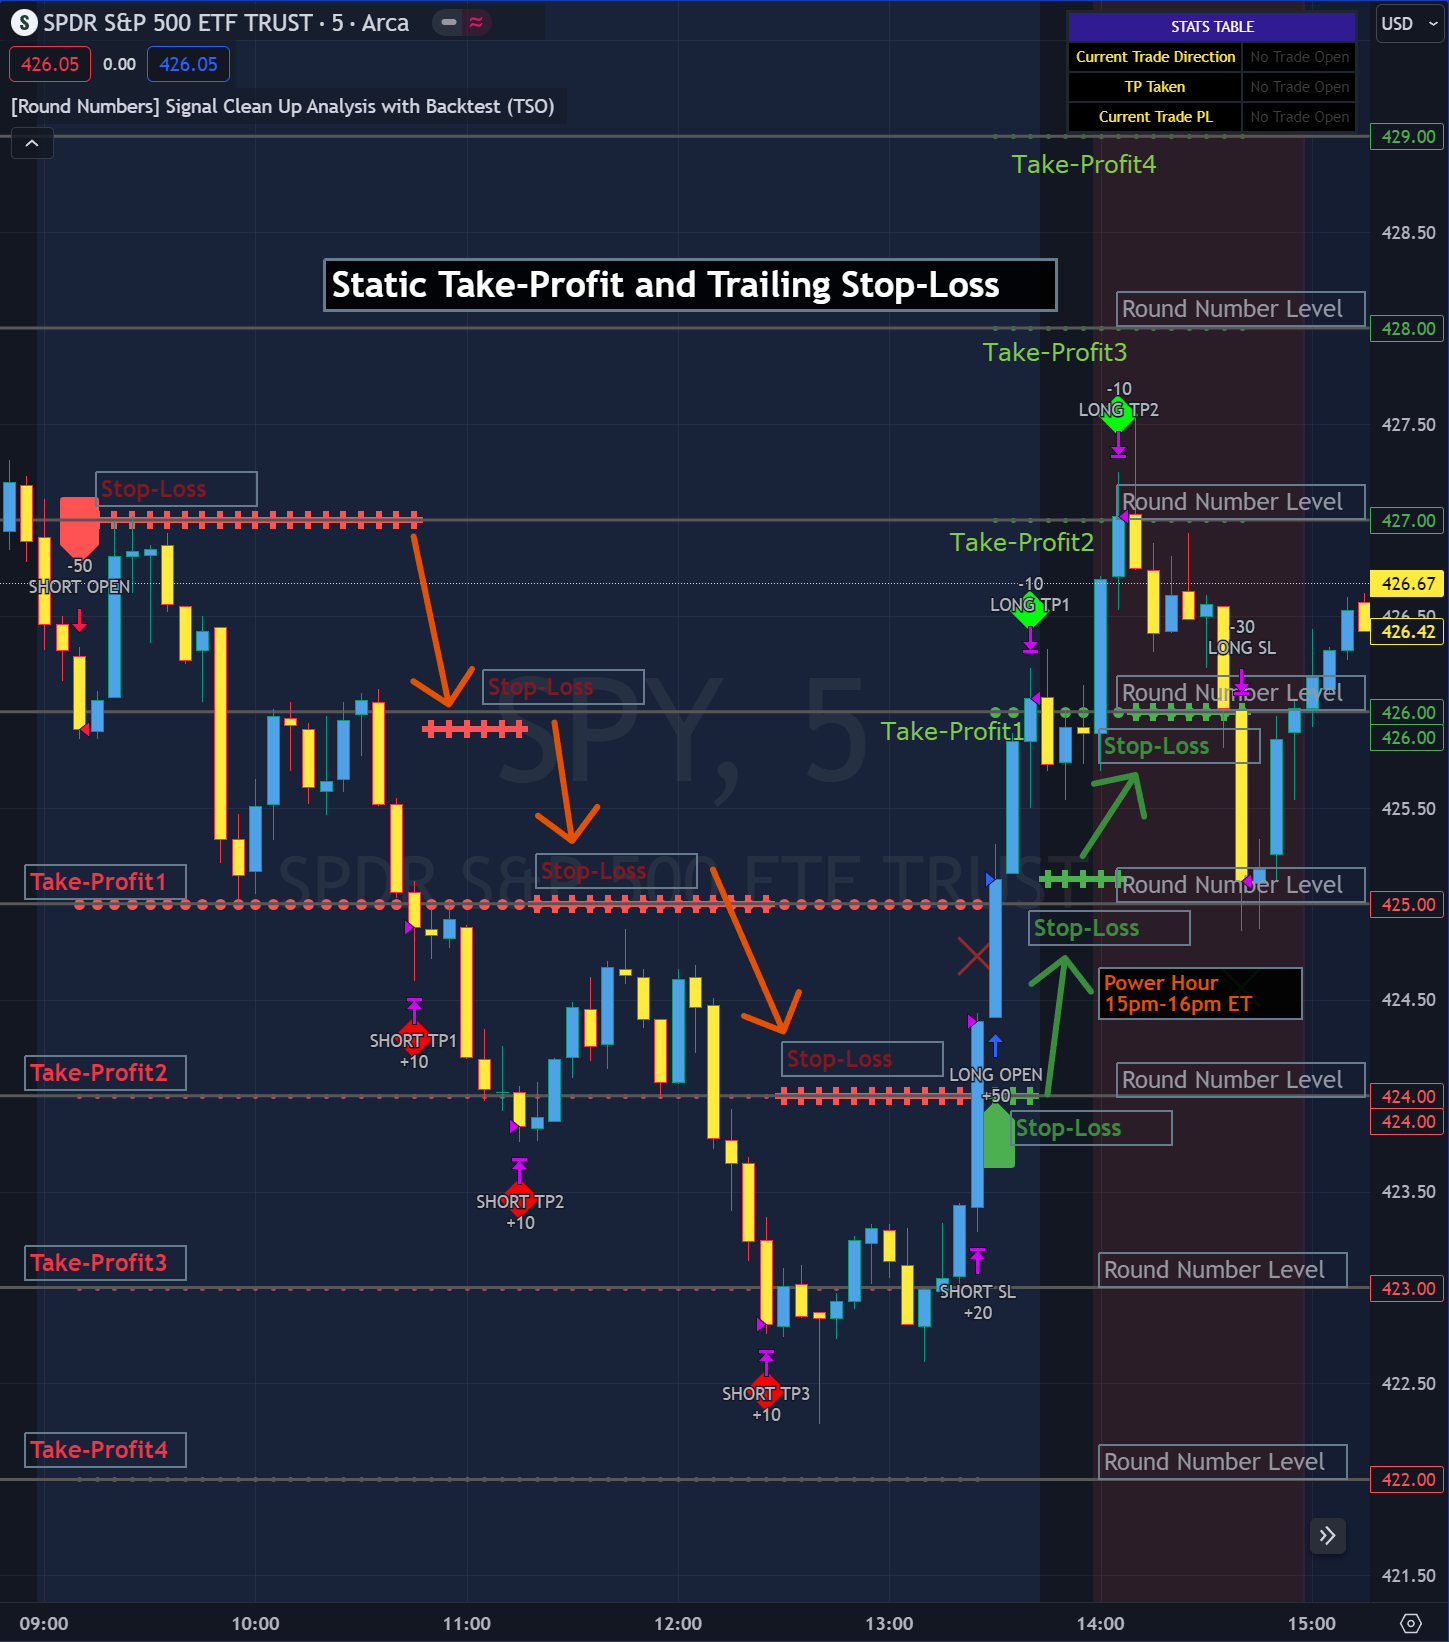 [Camarilla Pivots] Signal Clean Up Analysis with Backtest (TSO) for TradingView